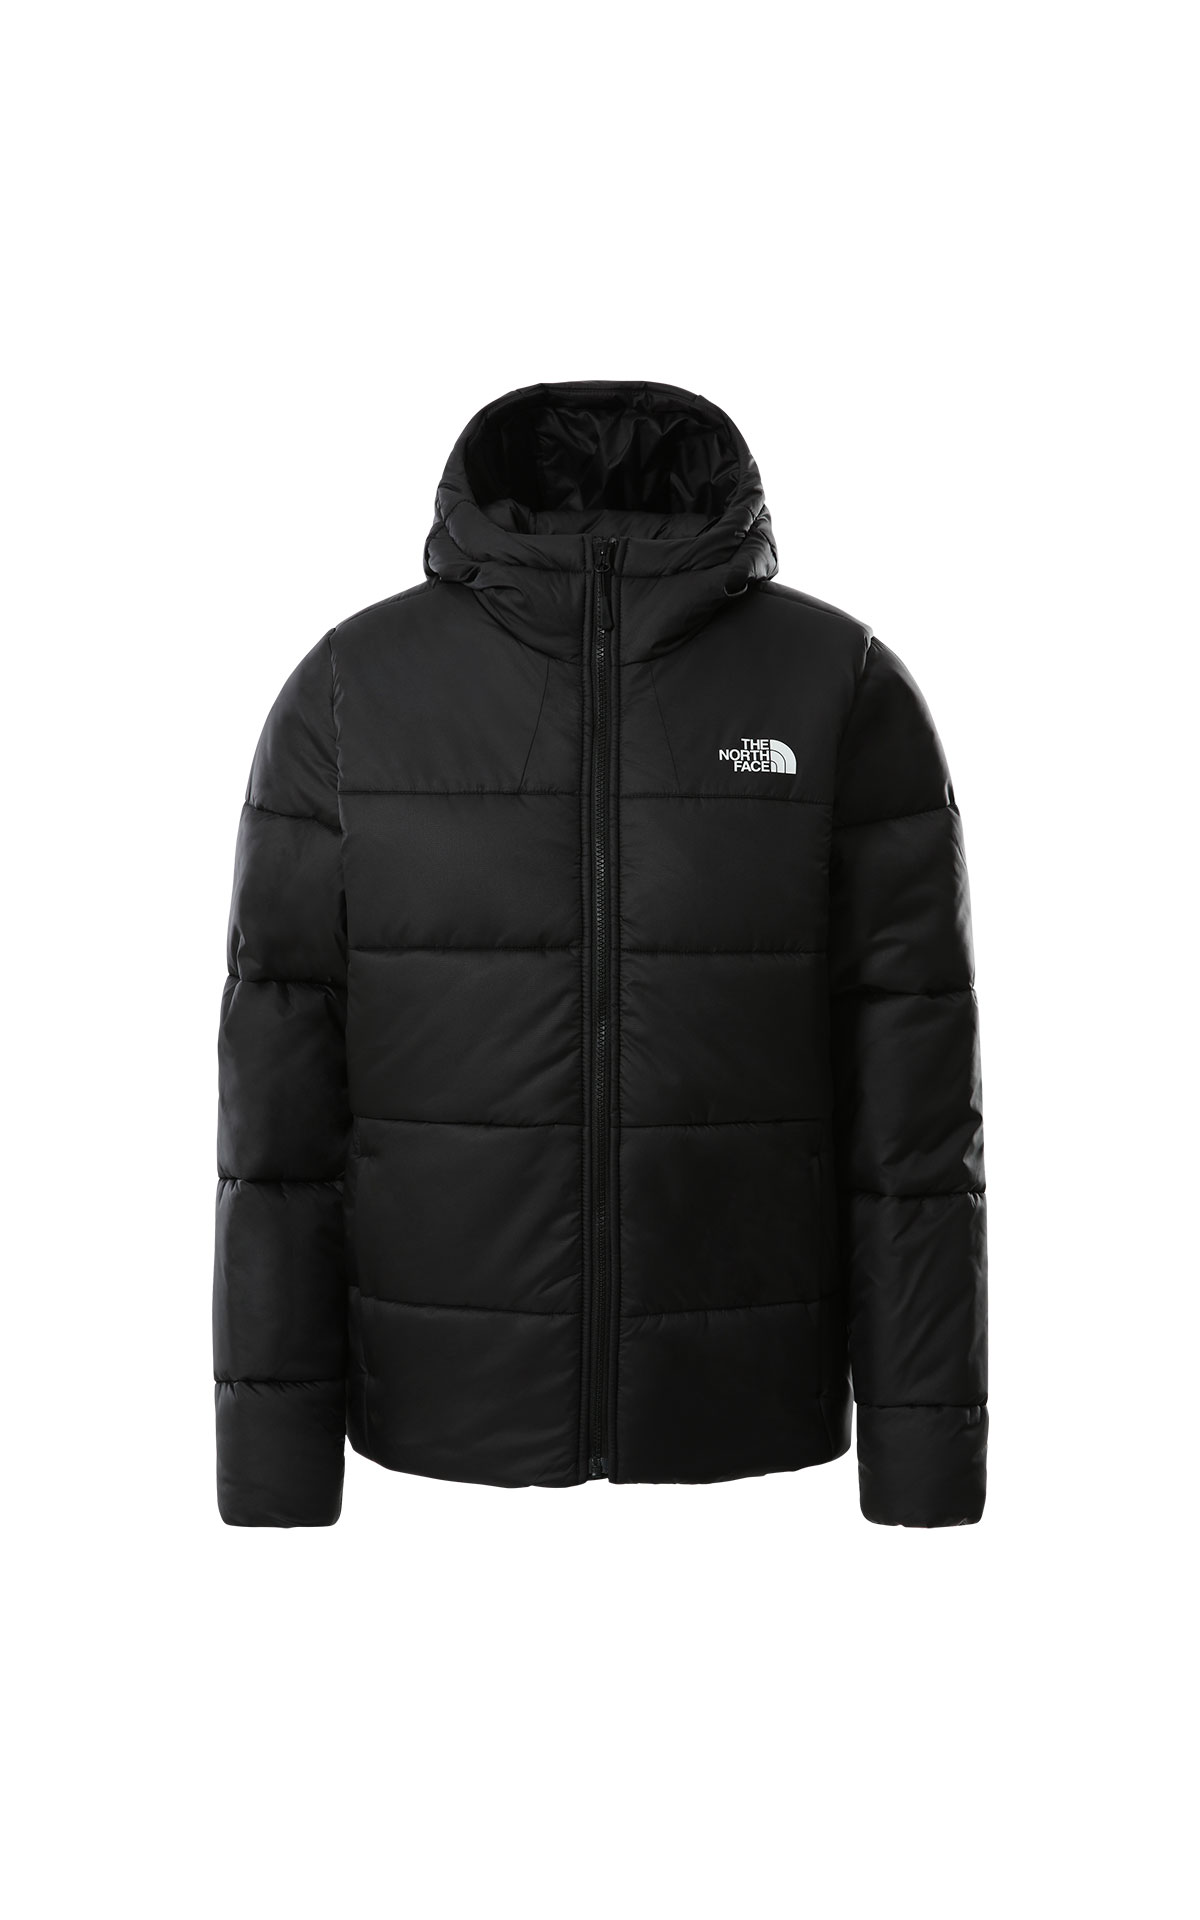 kildare outlet north face